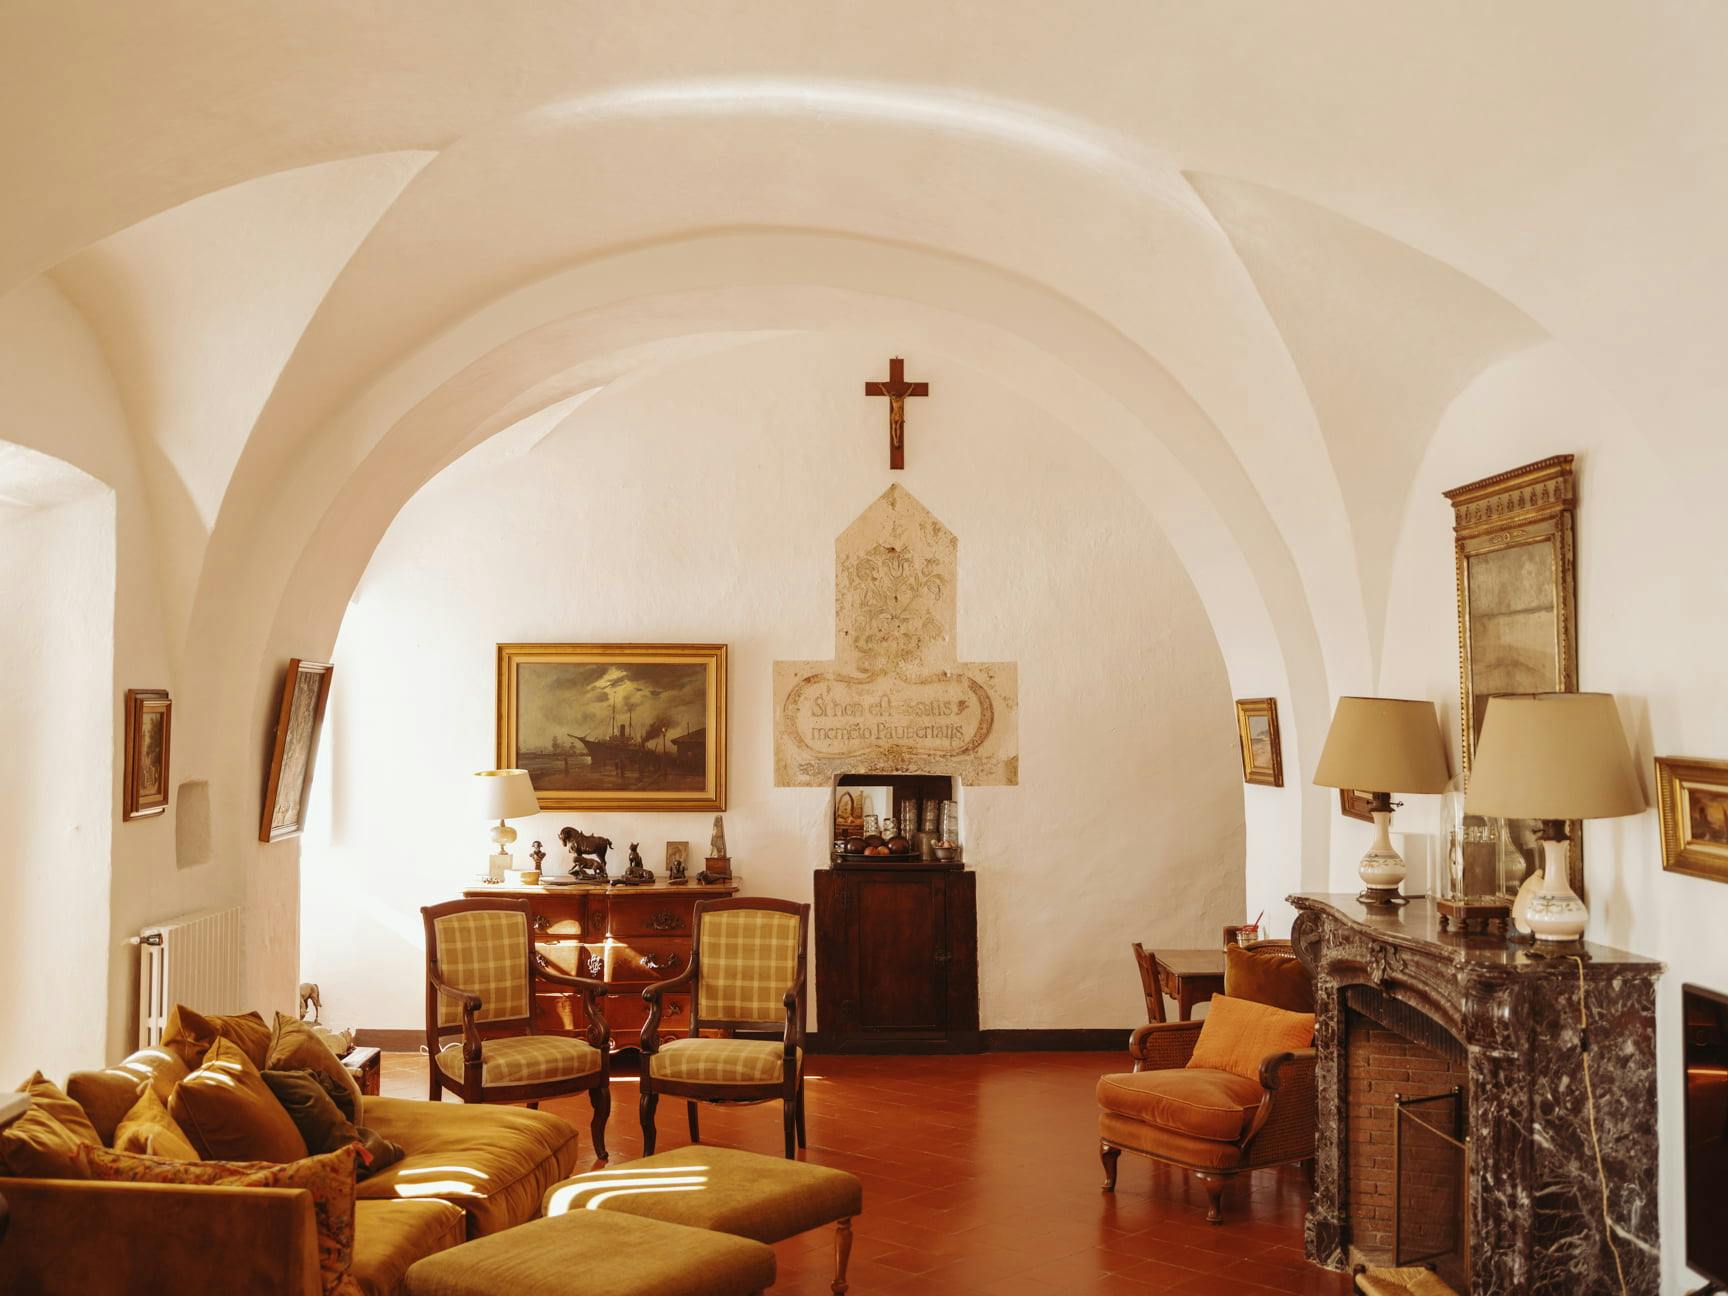 Living room, alcoves, monastic decor, sunny but subdued atmosphere